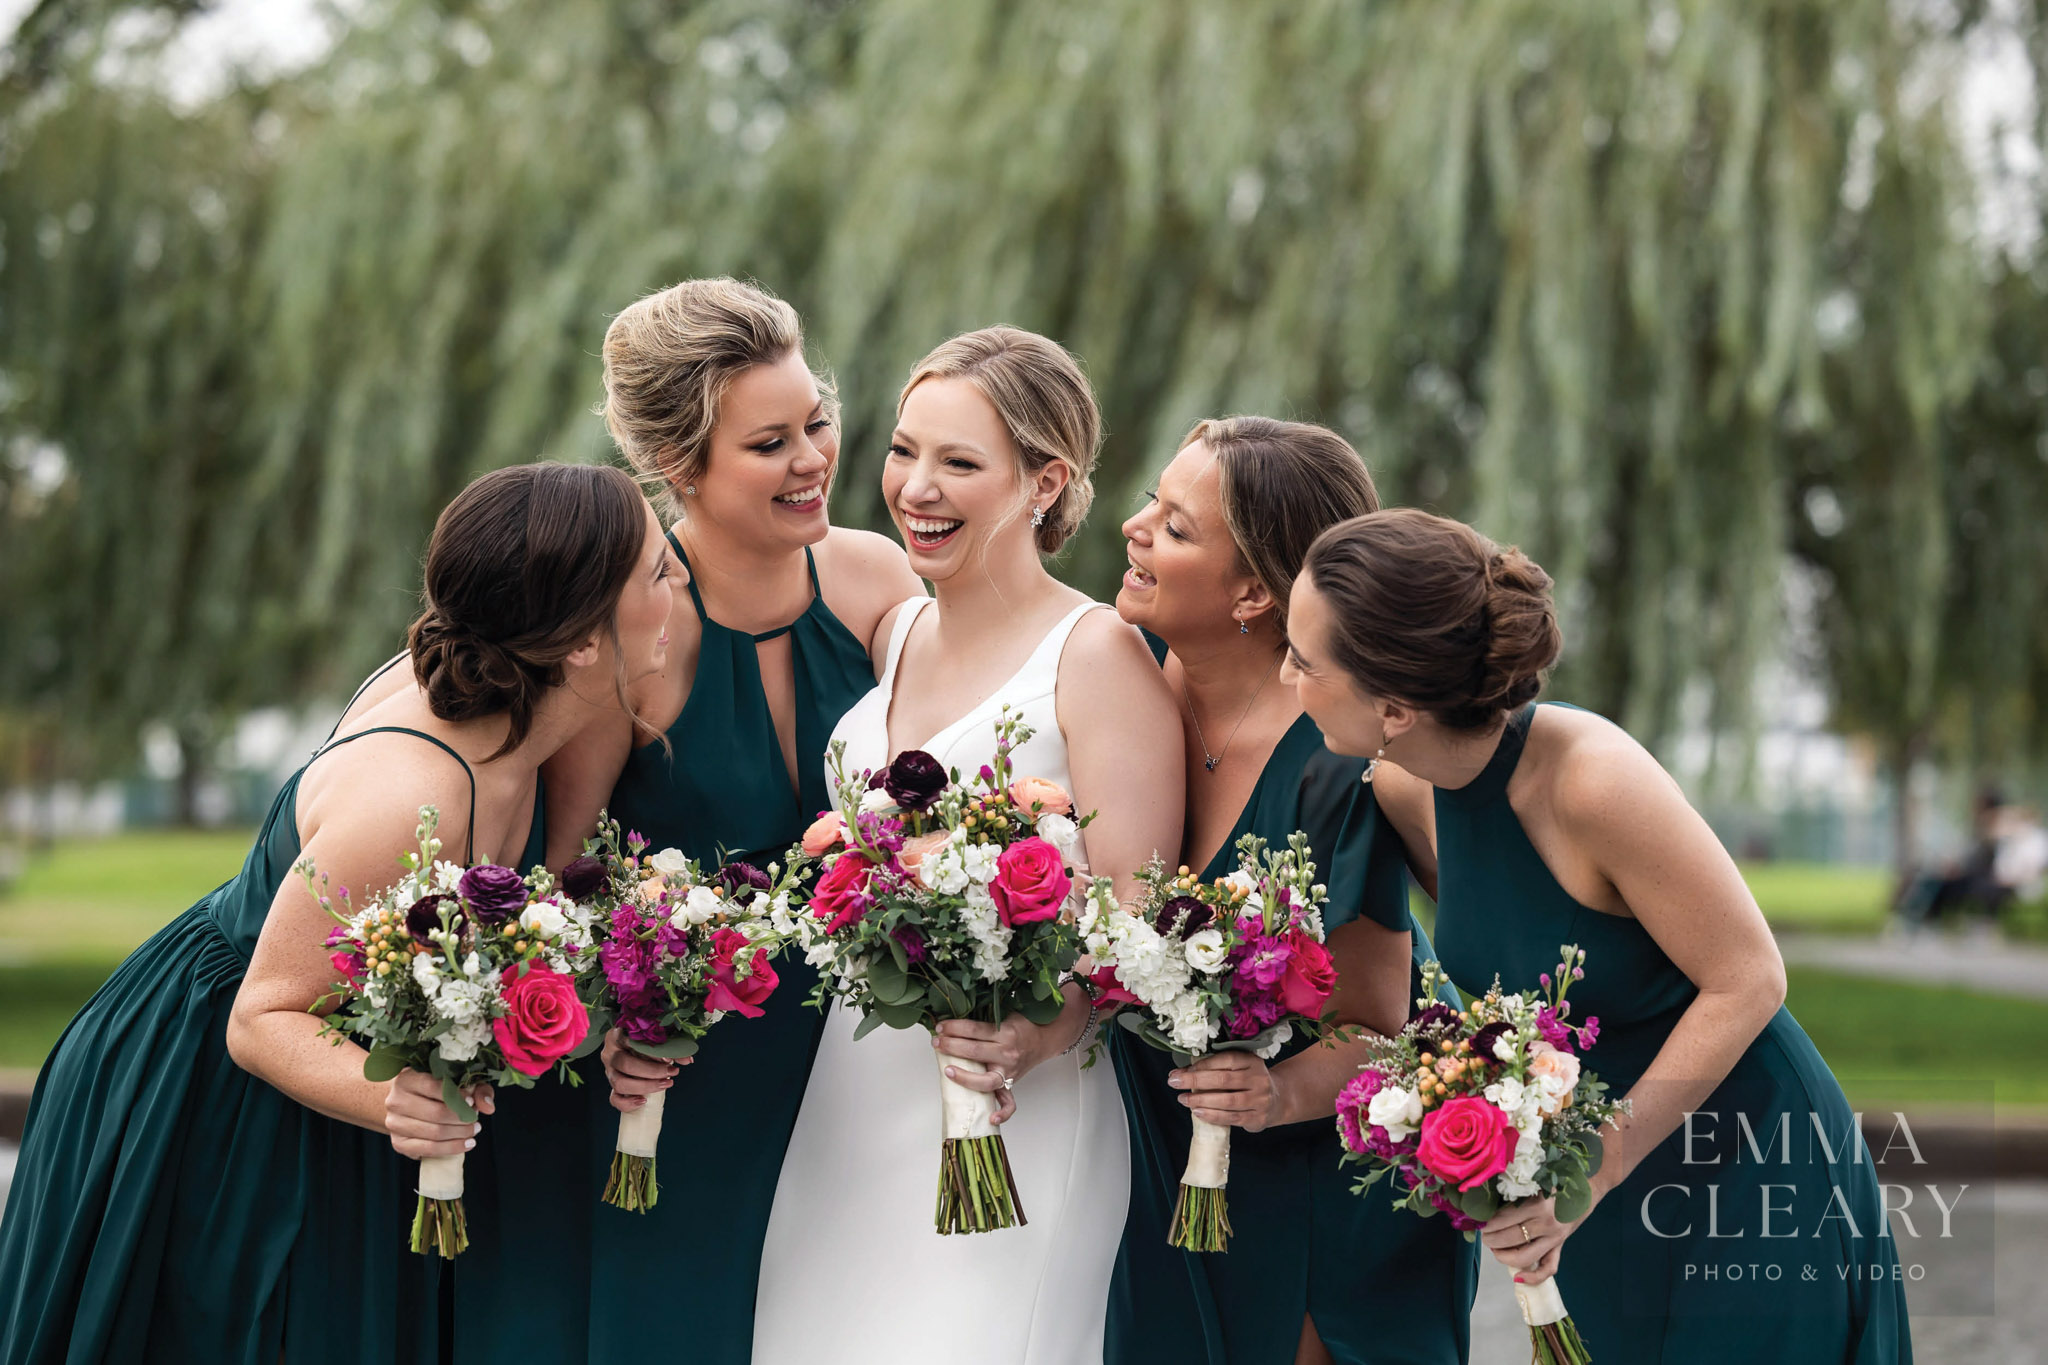 Laughing bridesmaids and the bride